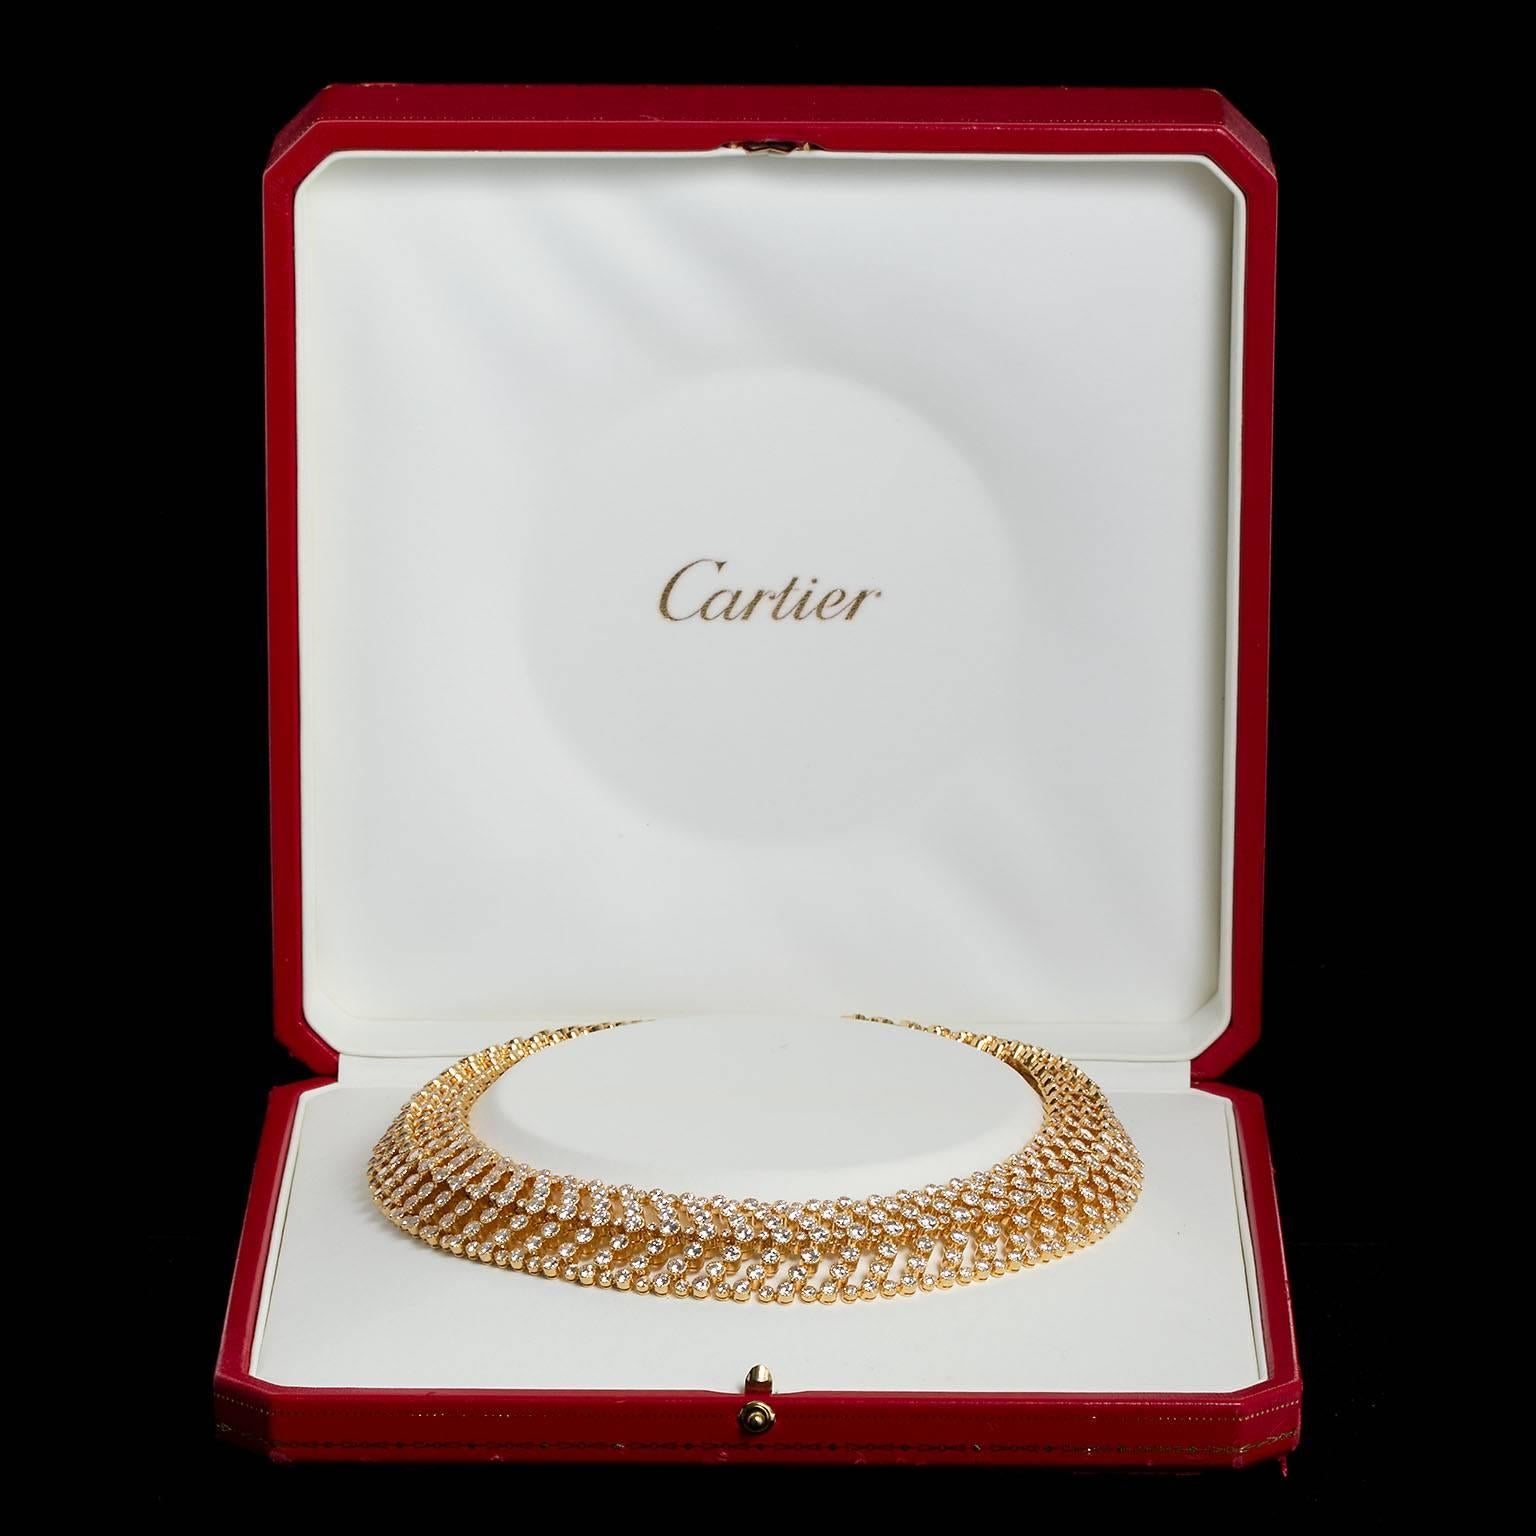 A vintage veined feather style diamond in 18 karat gold necklace by Cartier. Set with approx. 55 carats of round brilliant cut diamonds ranging from 0.03 to 0.25 cts.  Signed and numbered by Cartier Paris.  Fantastic crimped barrel style bezel